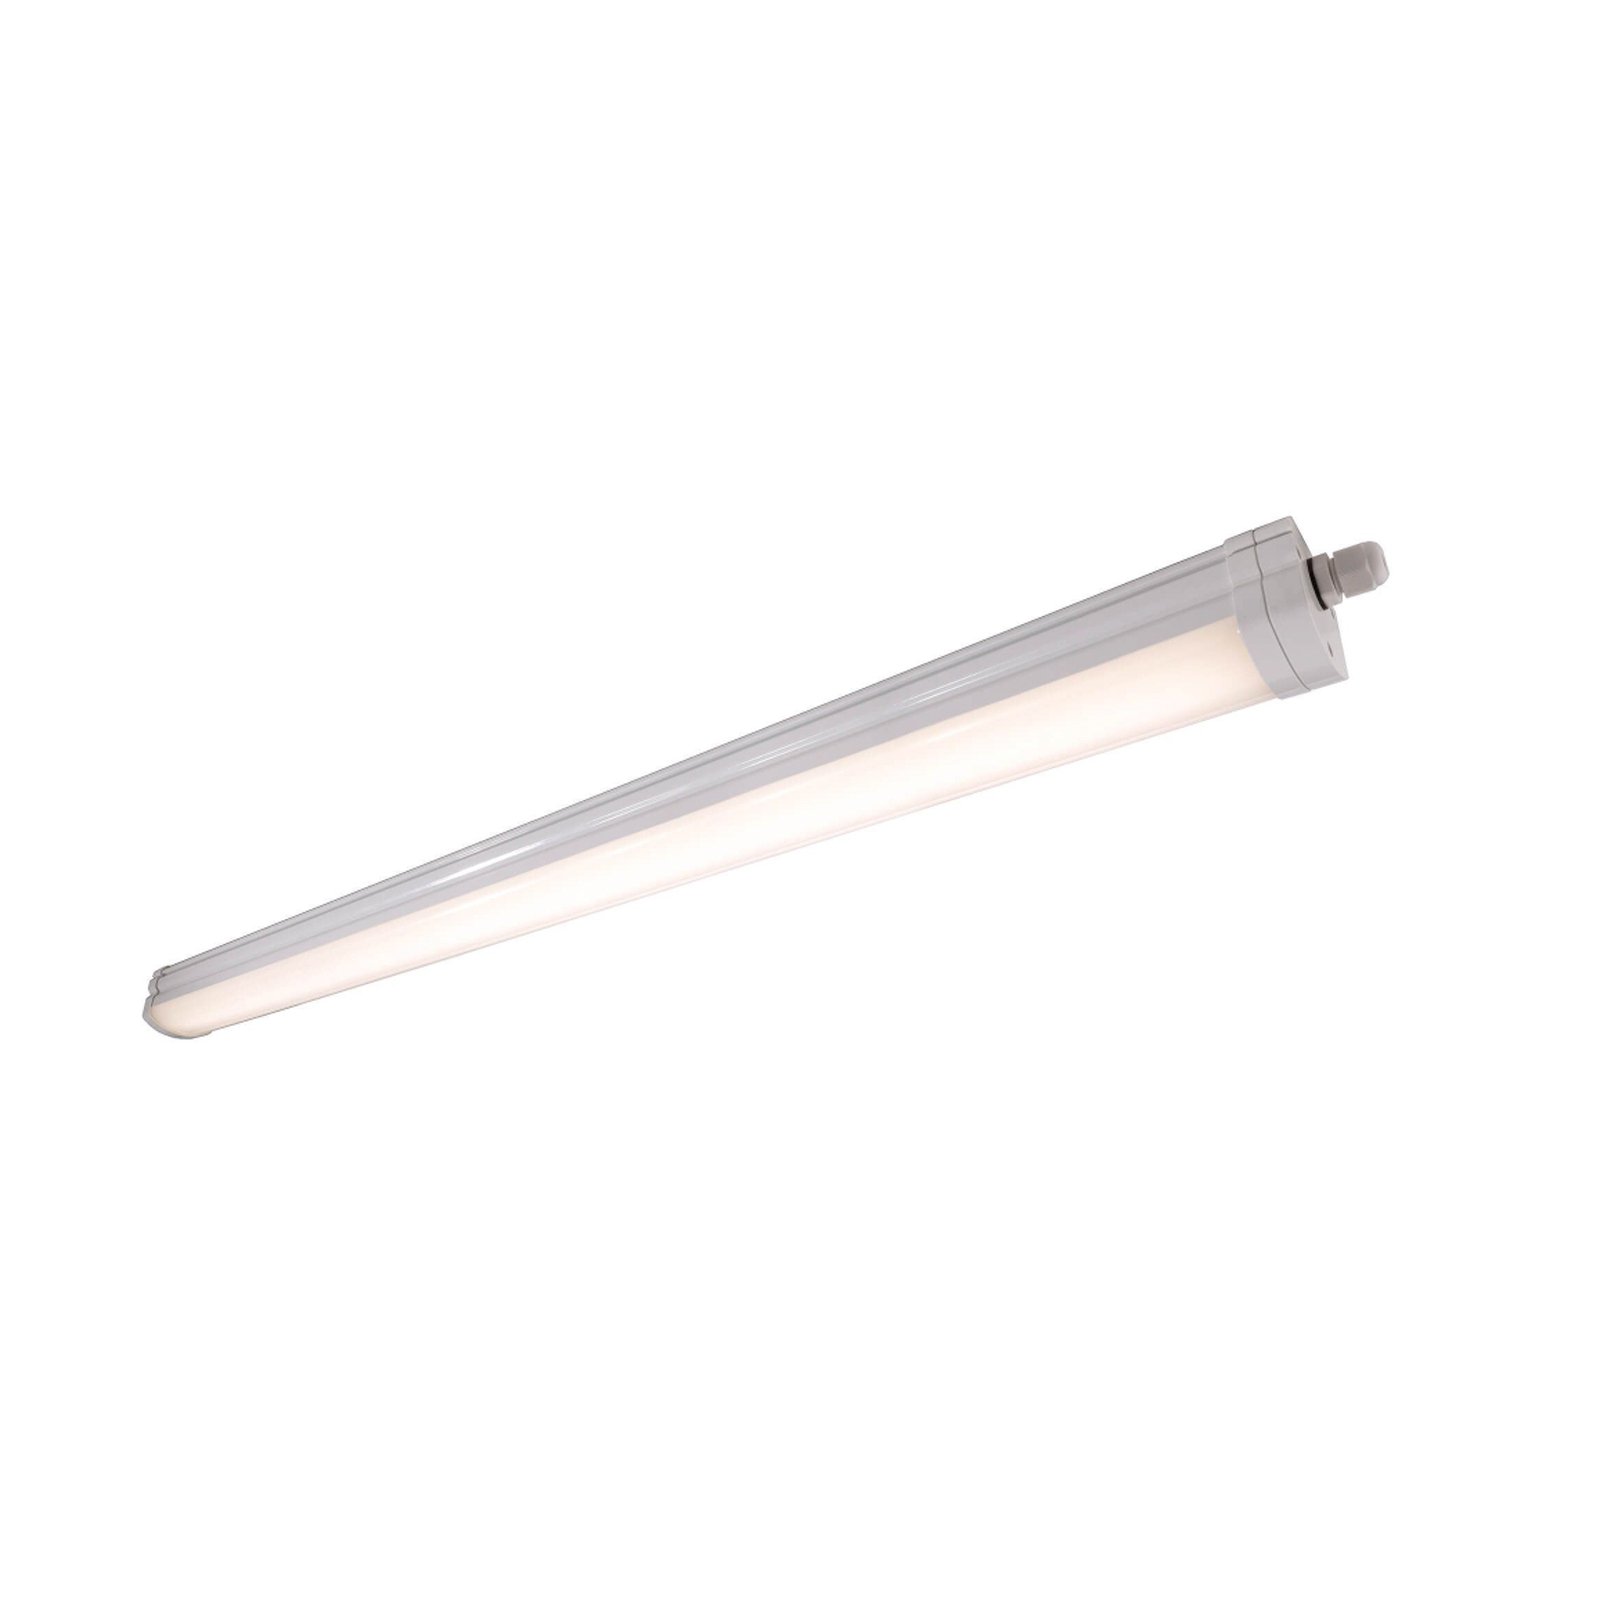 LED-Feuchtraumlampe Tri Proof Motion, 114,5 cm